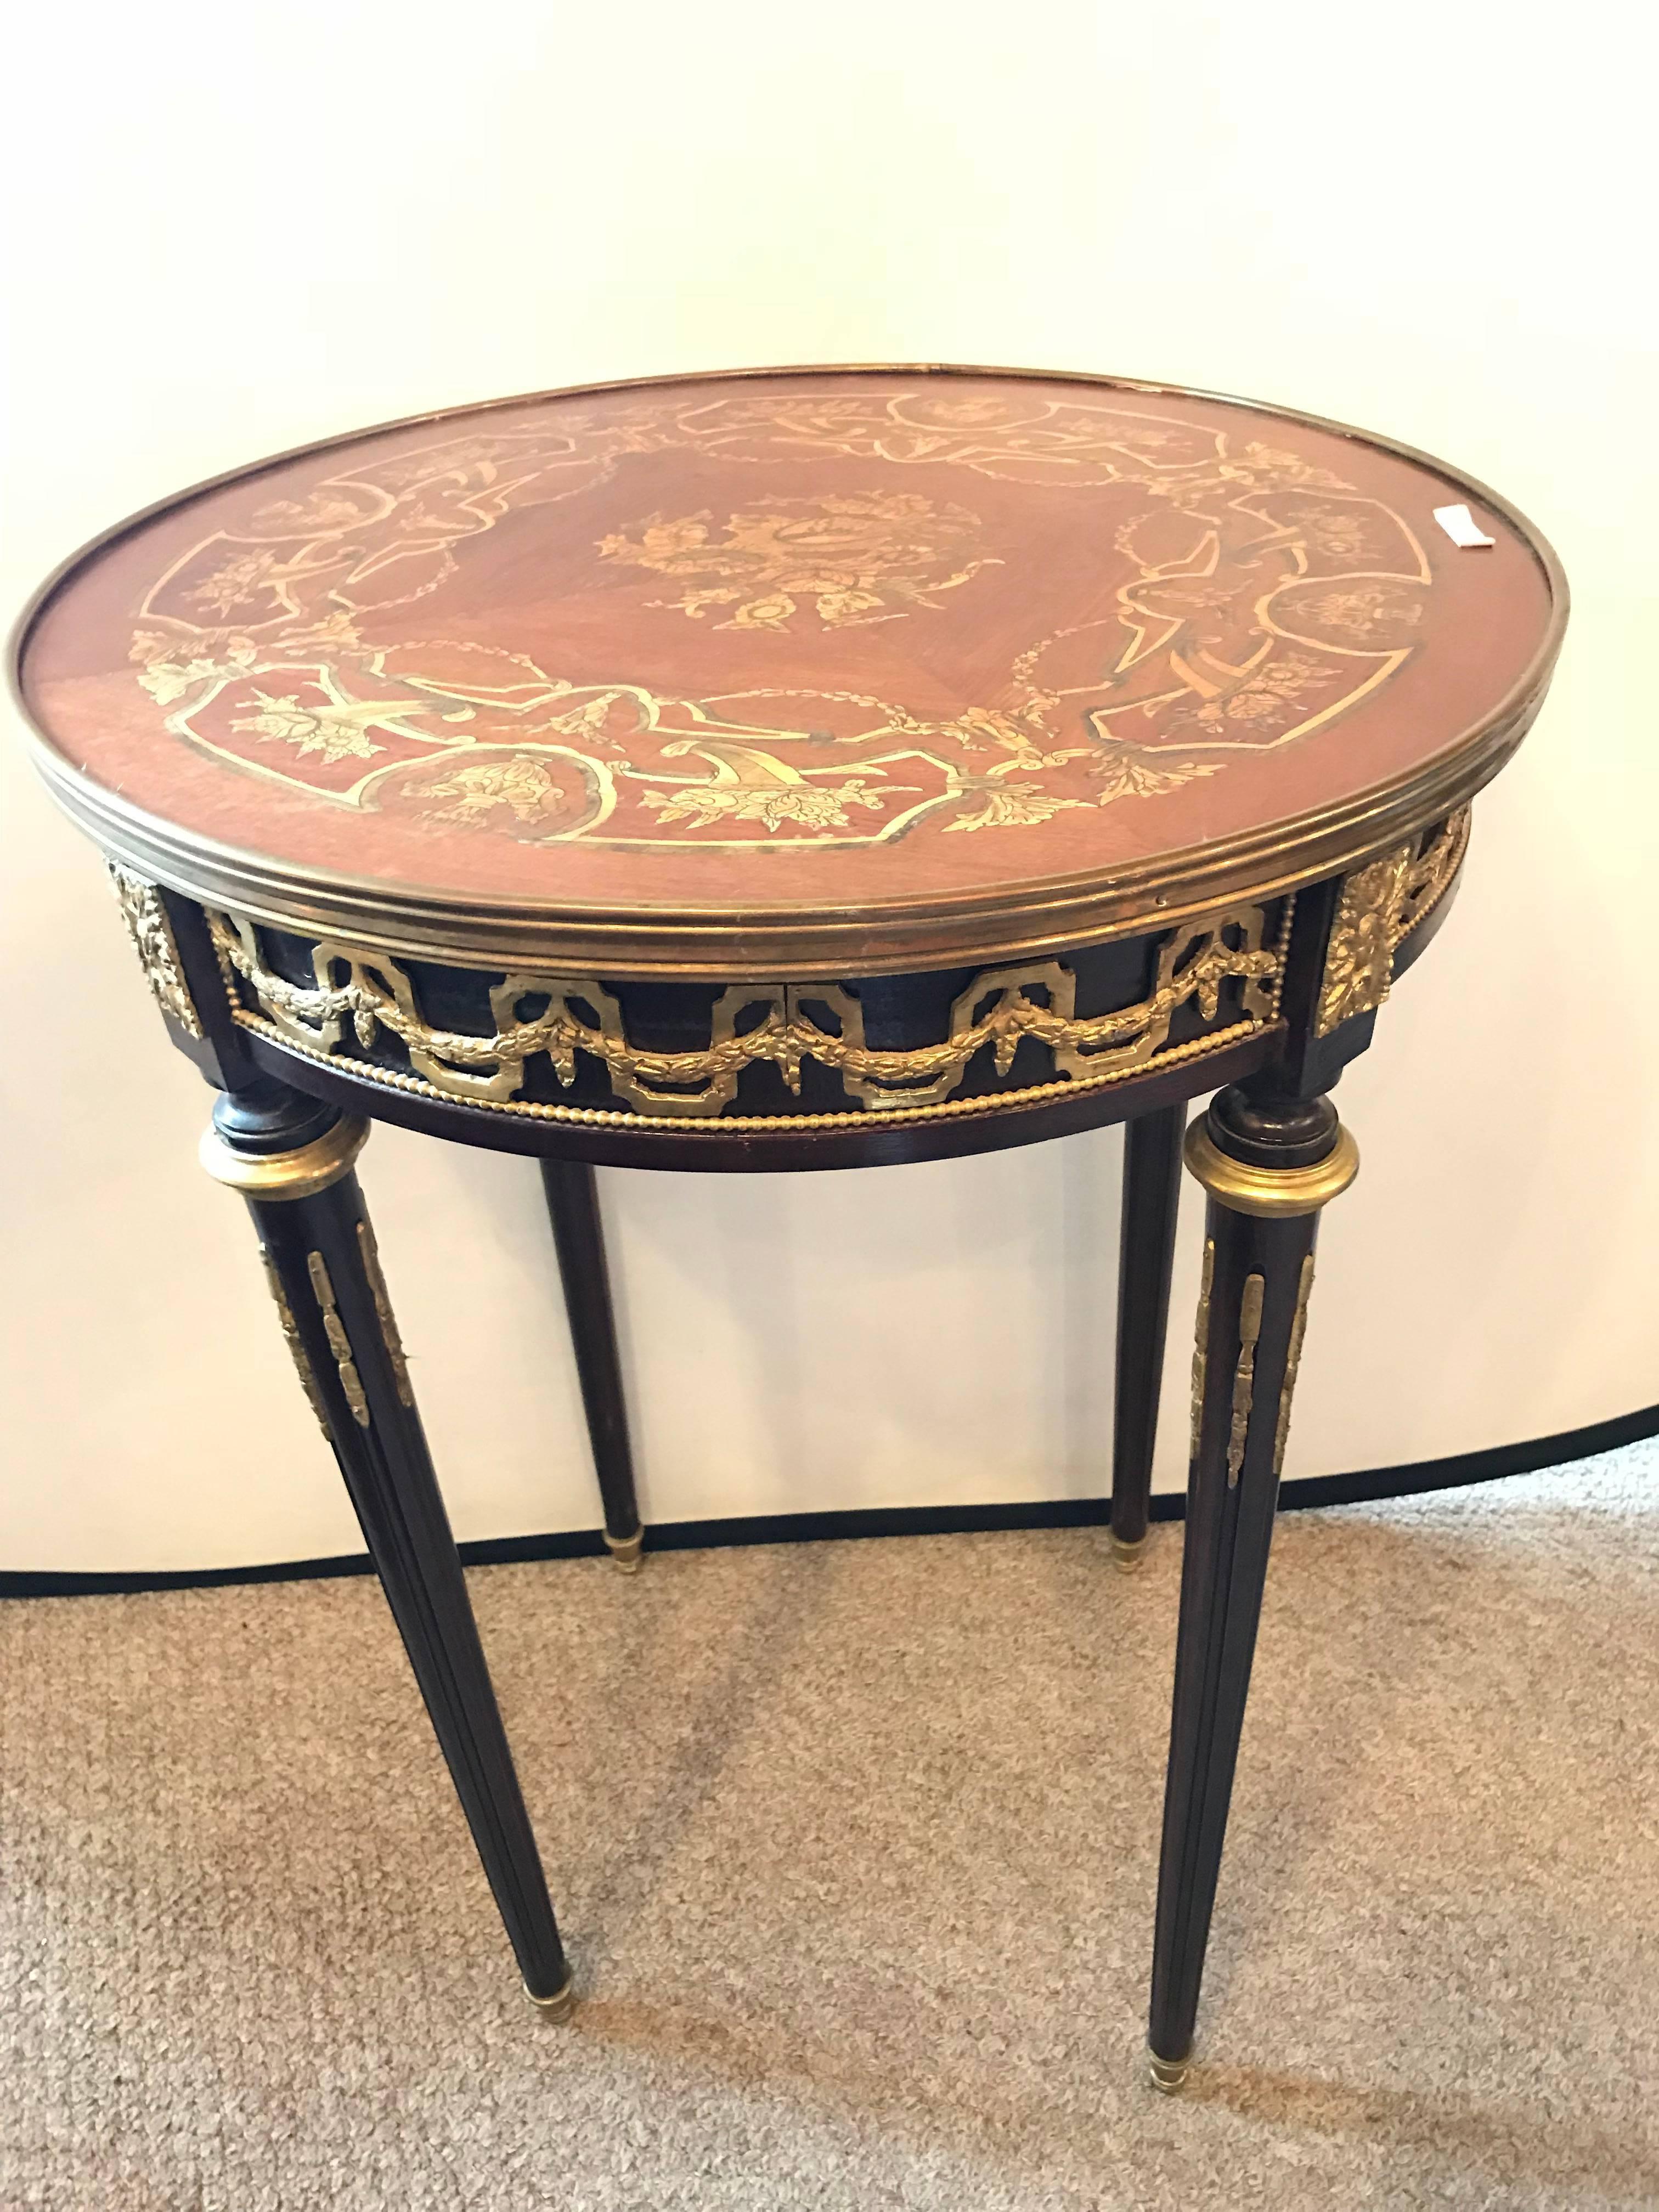 A Maison Jansen style French inlaid Bouillotte end or lamp table. Bronze mounts abound on this fine Louis XVI style end table. The reeded tapering legs with bronze mounts leading to support a bronze banded inlaid top.